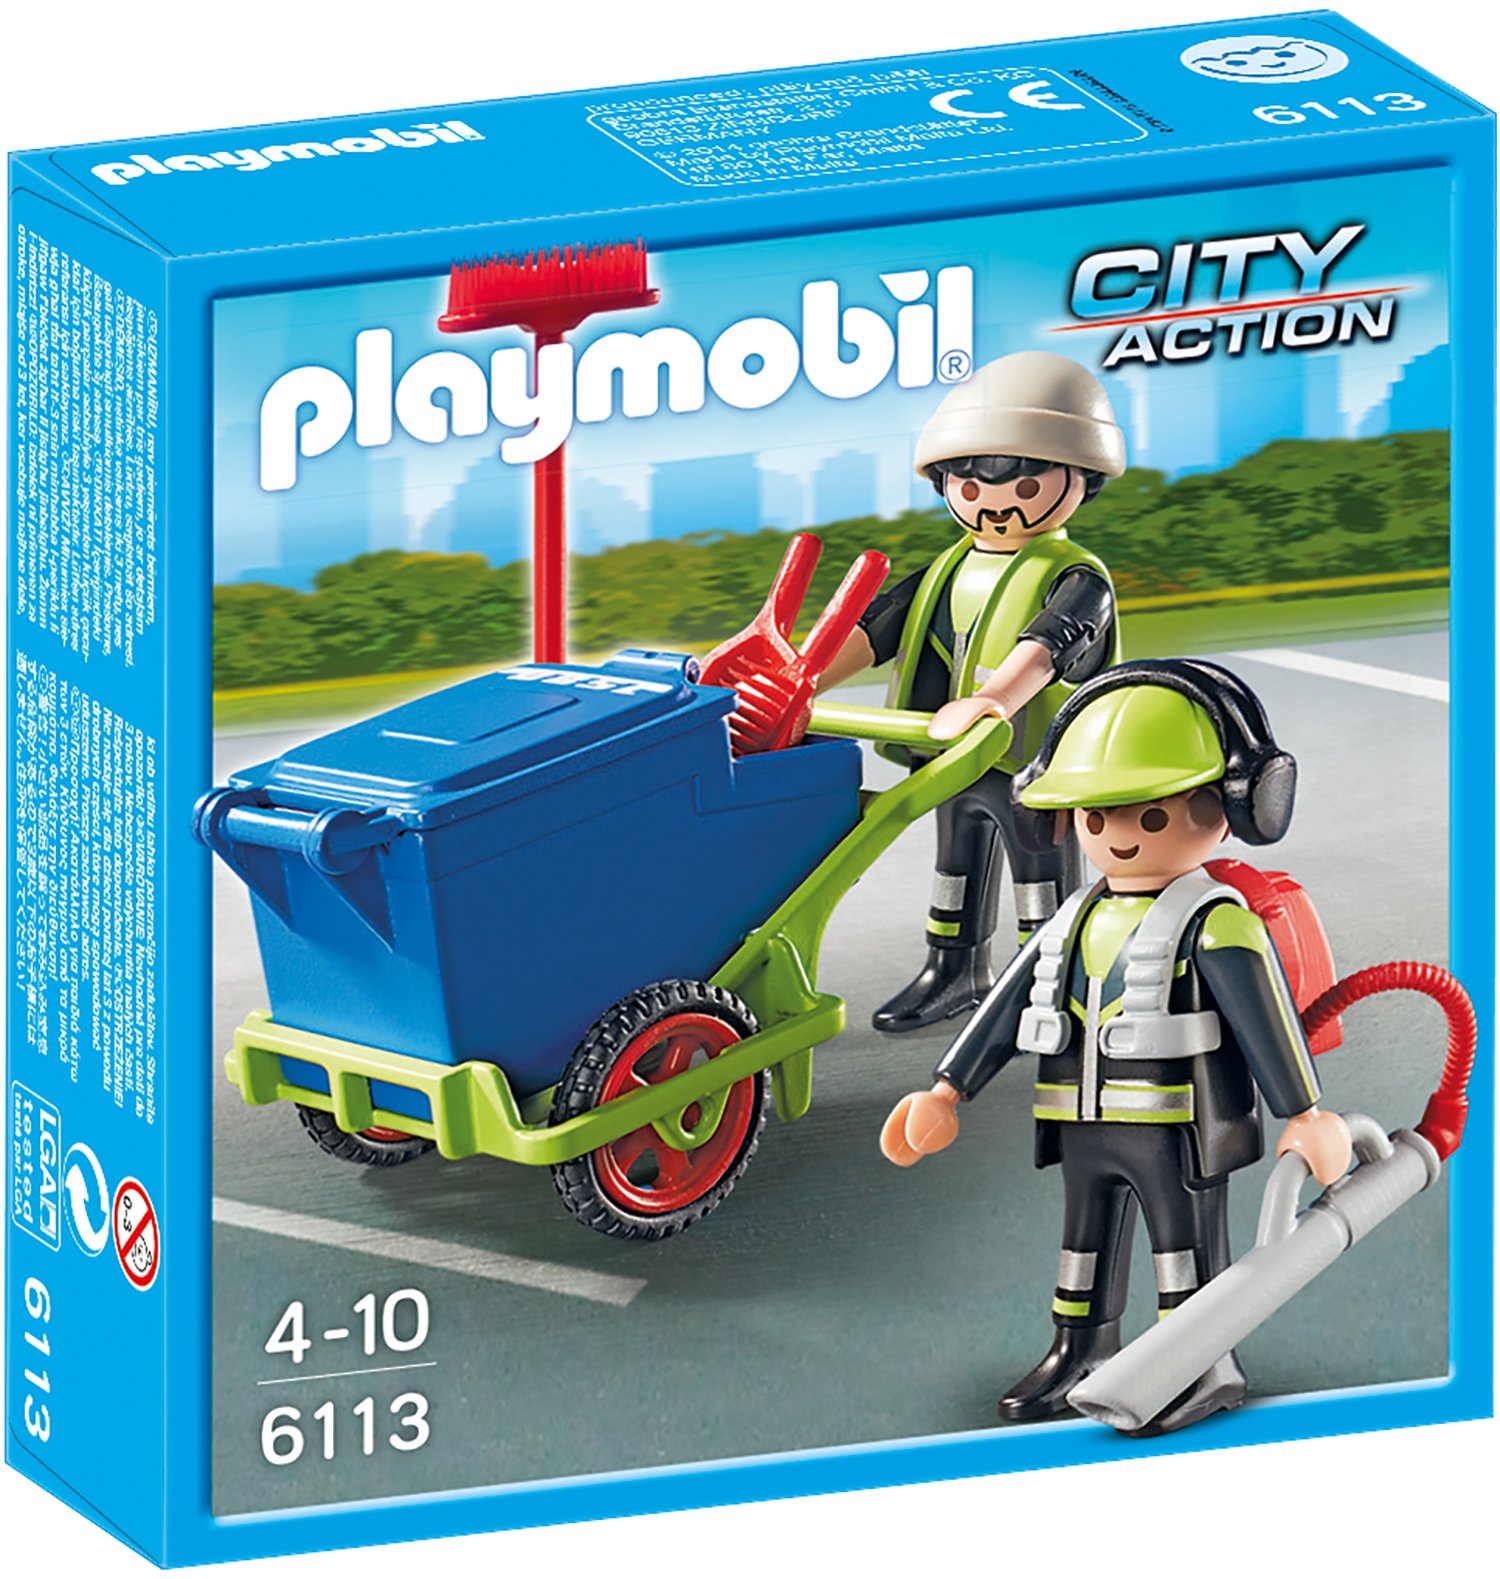 Playmobil City Action City Cleaning Sanitation Team